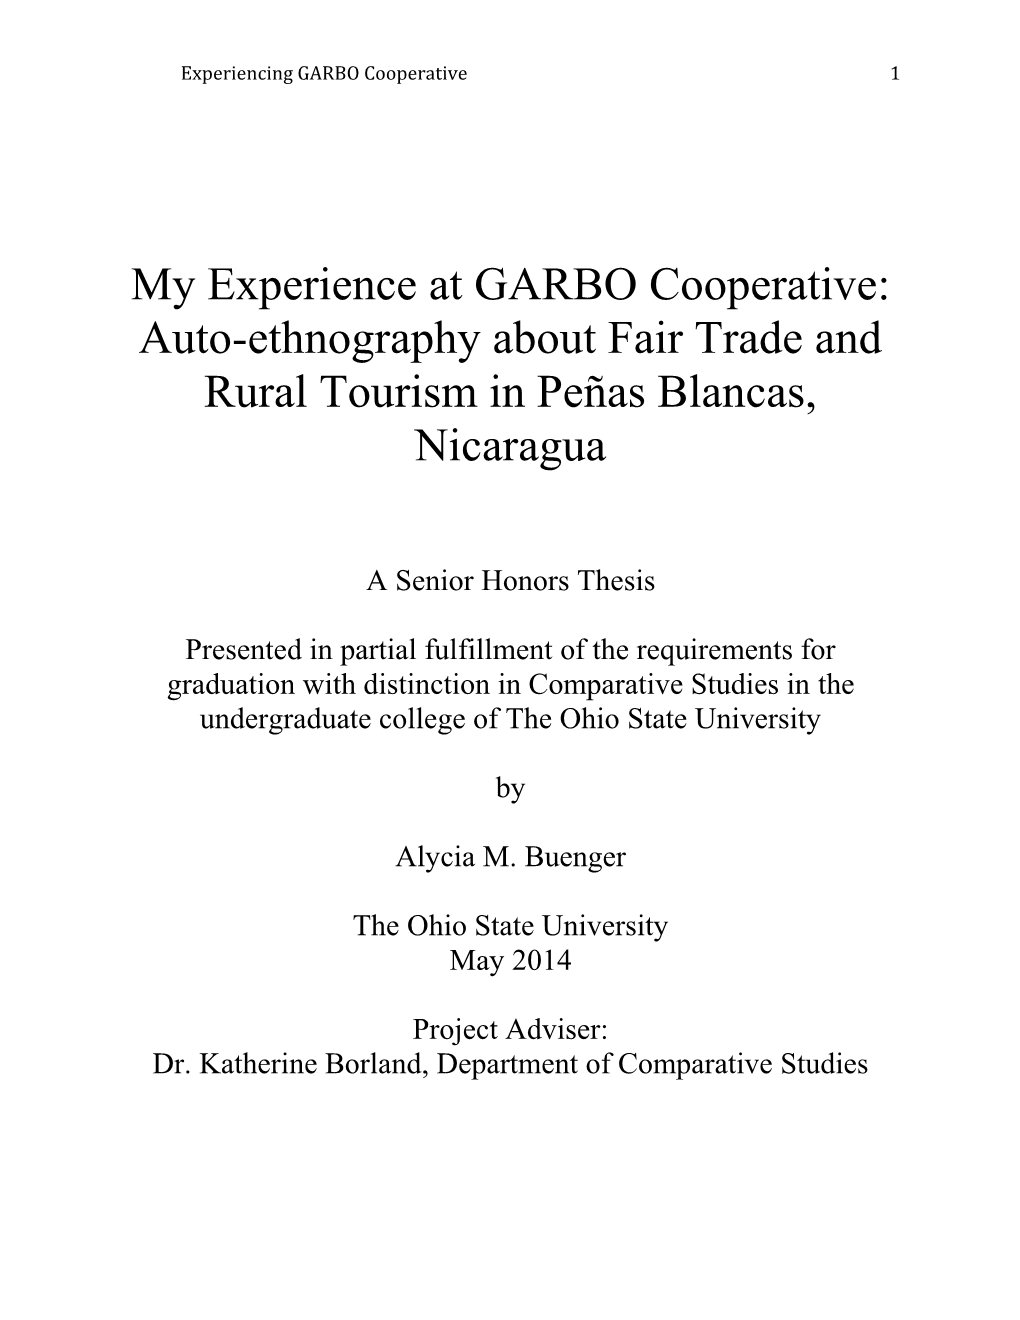 My Experience at GARBO Cooperative: Auto-Ethnography About Fair Trade and Rural Tourism in Peñas Blancas, Nicaragua